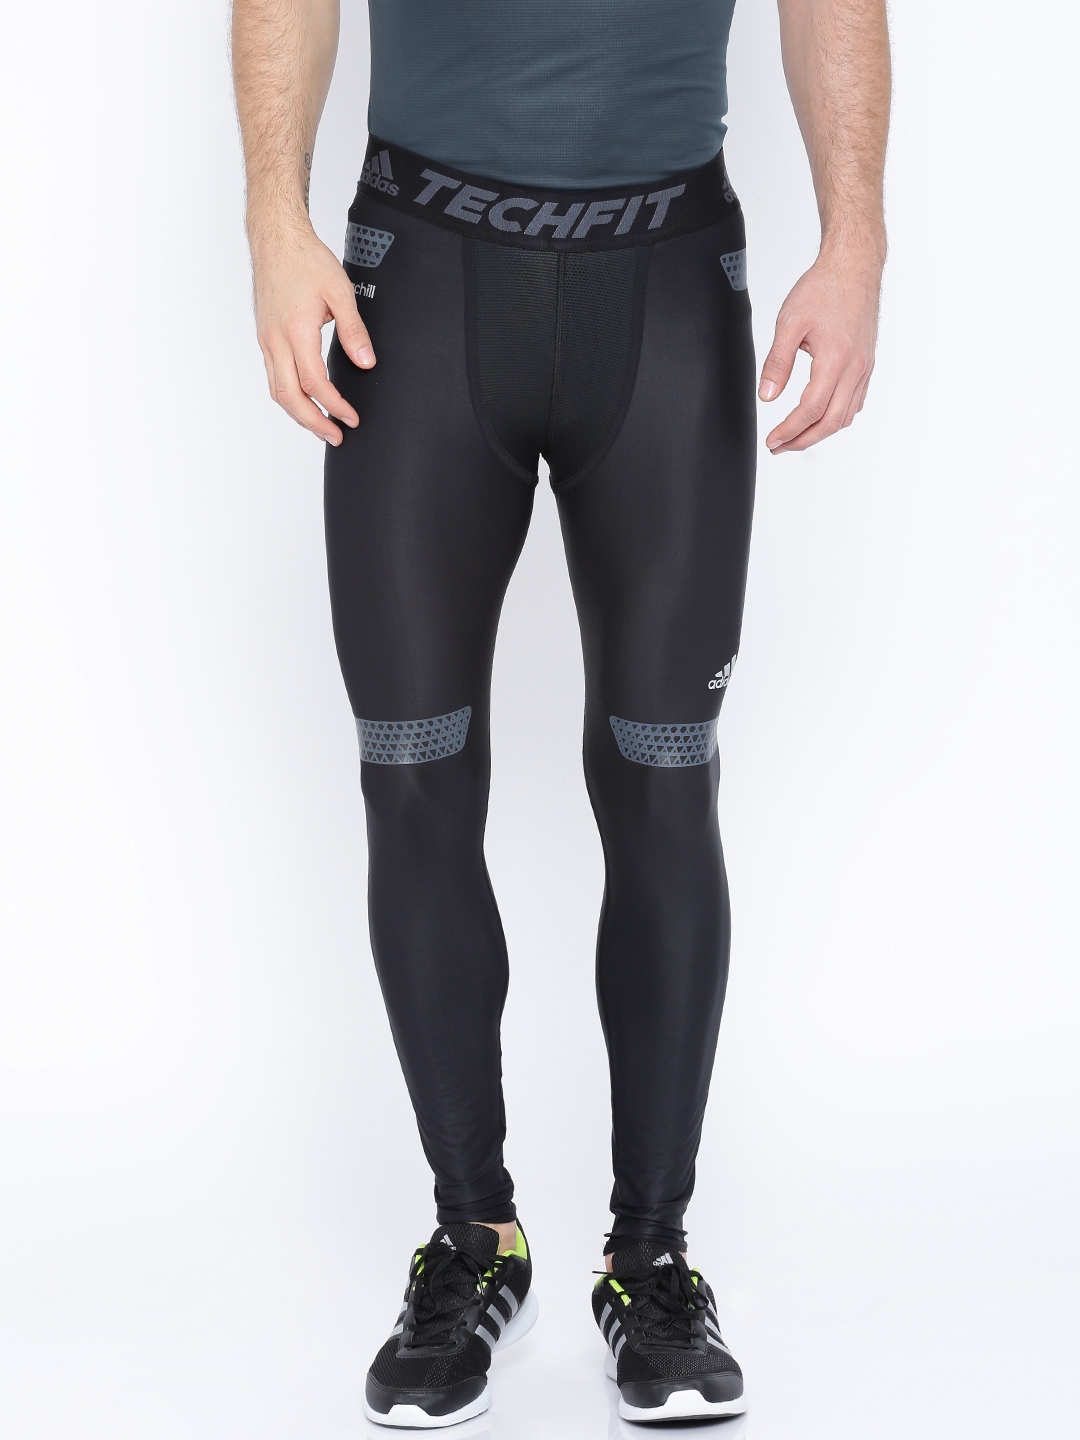 Buy ADIDAS Black TechFit Power Compression Tights - Tights for Men